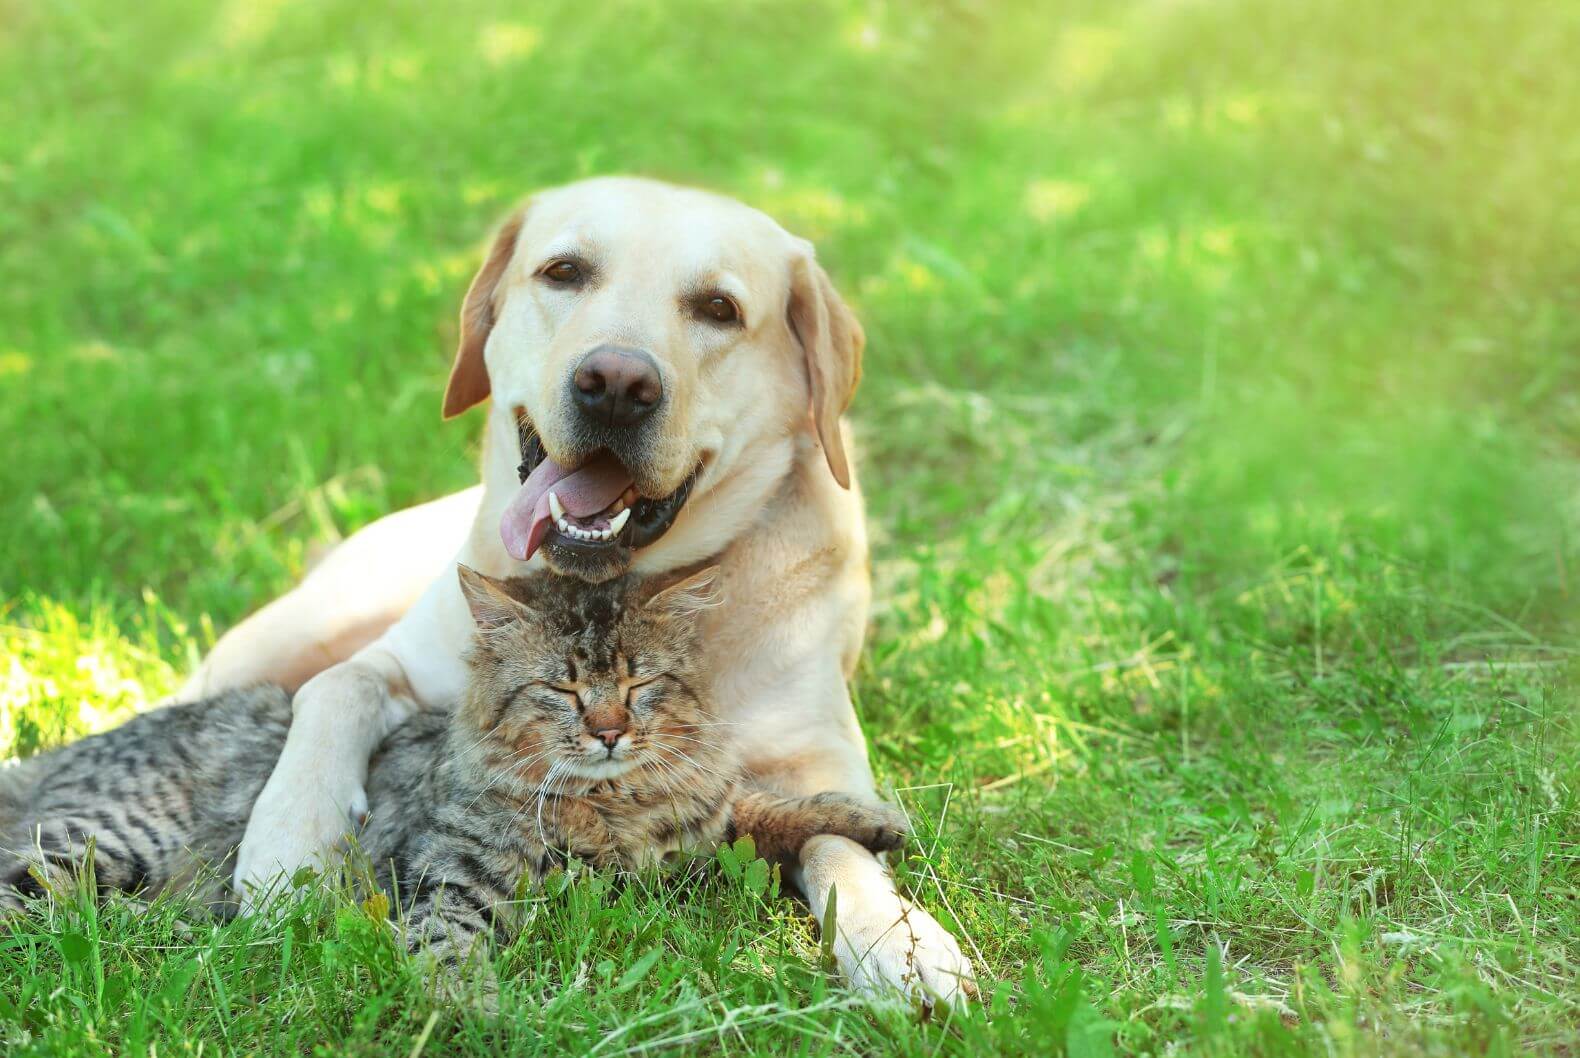 Image of Cat and Dog